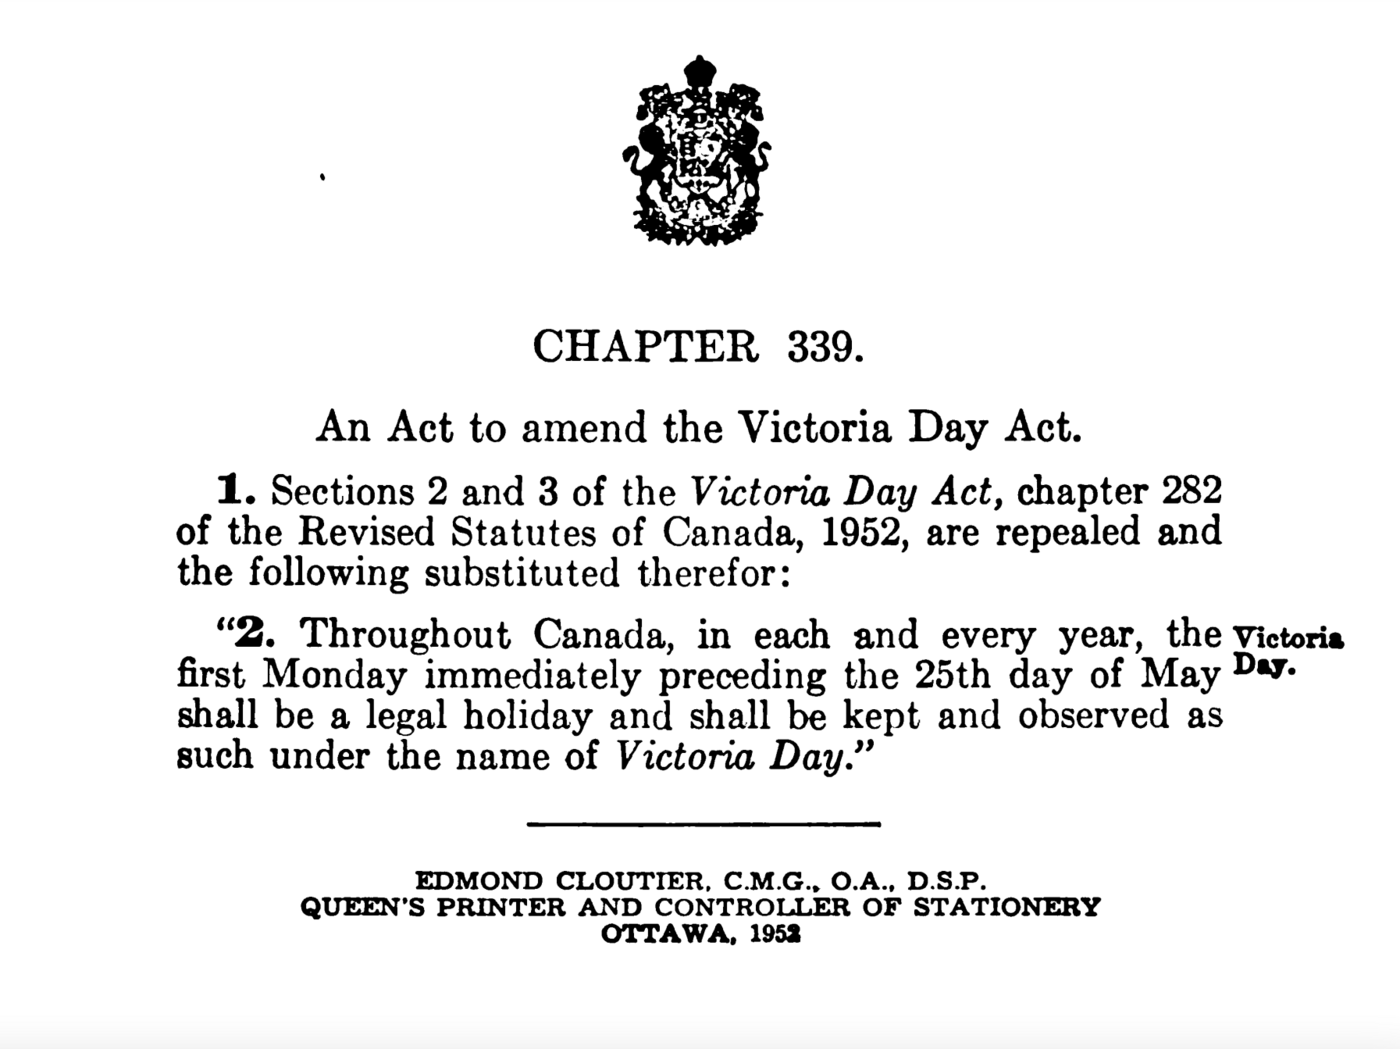 This is why we celebrate Victoria Day in Canada